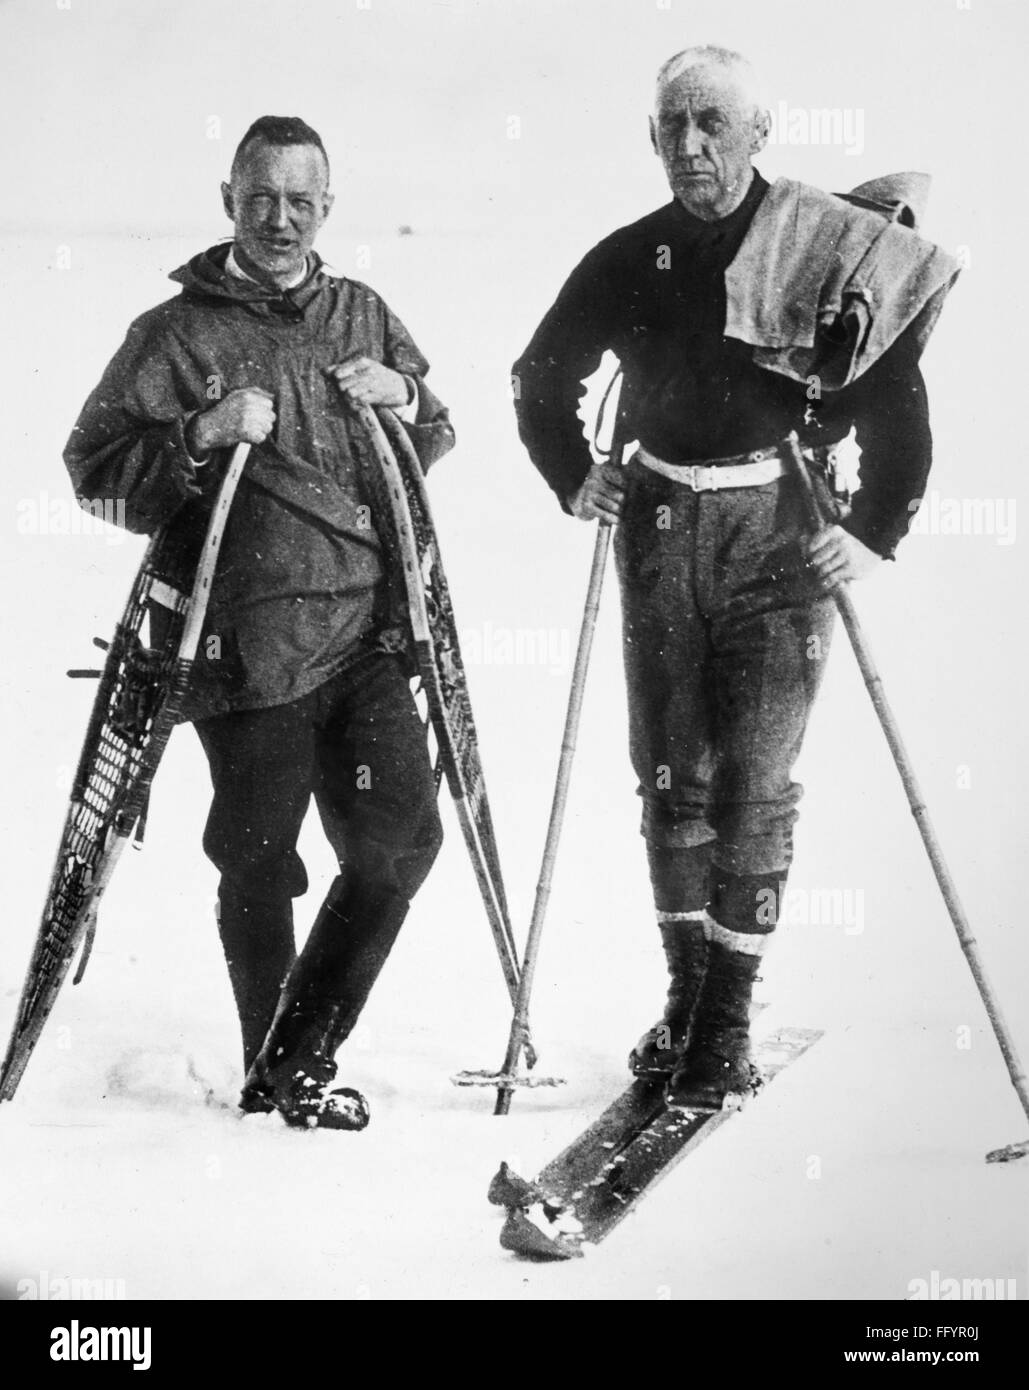 ELLSWORTH & AMUNDSEN, c1926. /nAmerican and Norwegian explorers Lincoln Ellsworth (left) and Roald Amundsen, photographed at Spitsbergen Island, Norway, during an expedition to fly over the North Pole, c1926. Stock Photo